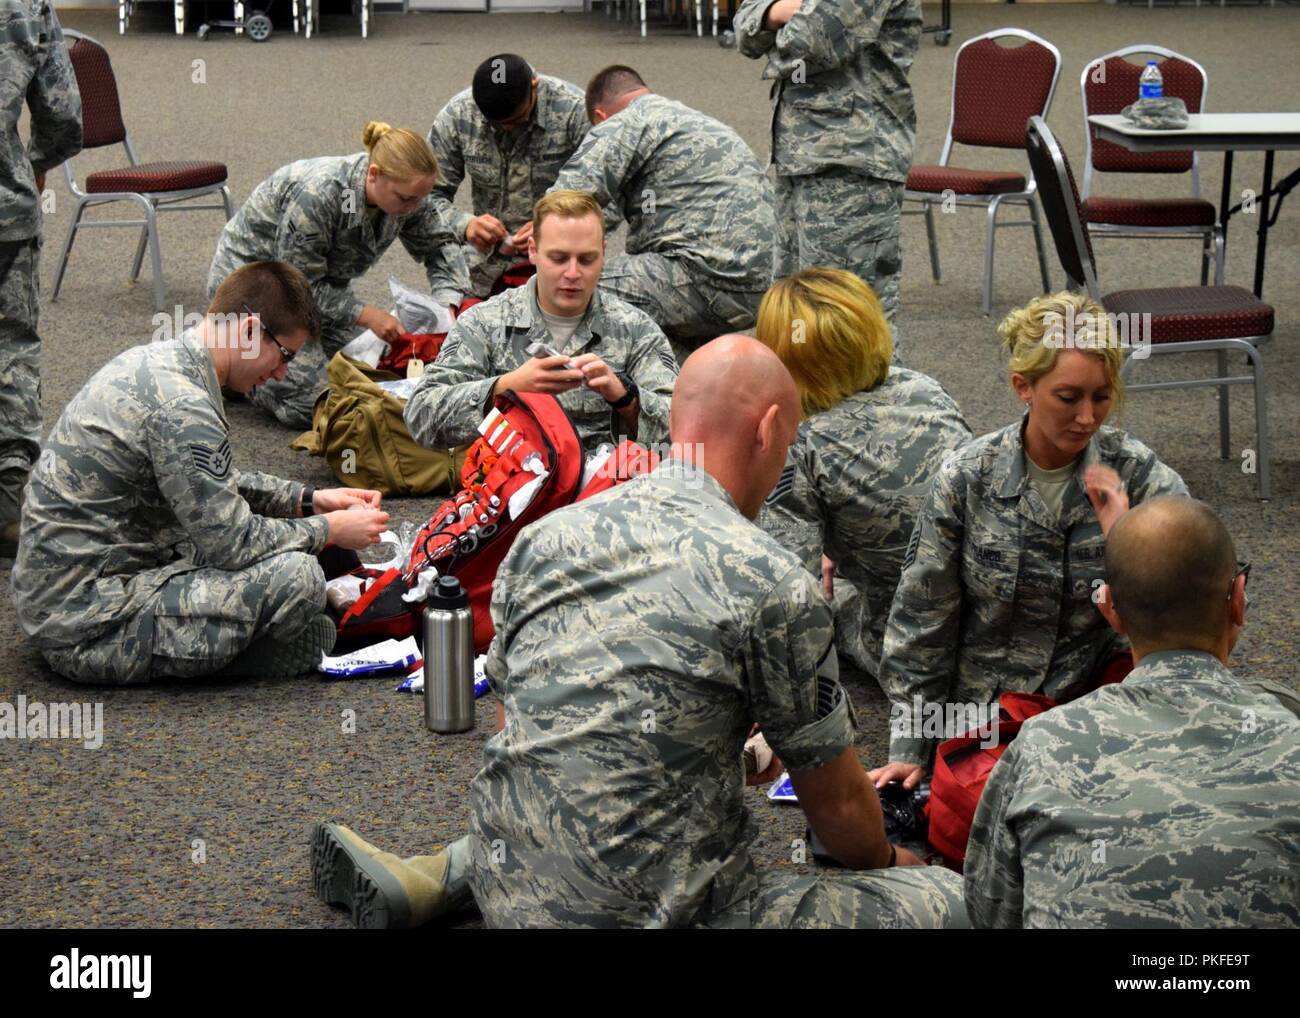 Members of the Medical Group, 185th Air Refueling Wing, Sioux City, Ia., participate in the Savannah Storm Exercise at the Savannah Air National Guard Base in Georgia. The Medical Group's Medical Rapid Response Team (MRRT) prepares their go-bags for the upcoming mass-casualty exercise. Stock Photo